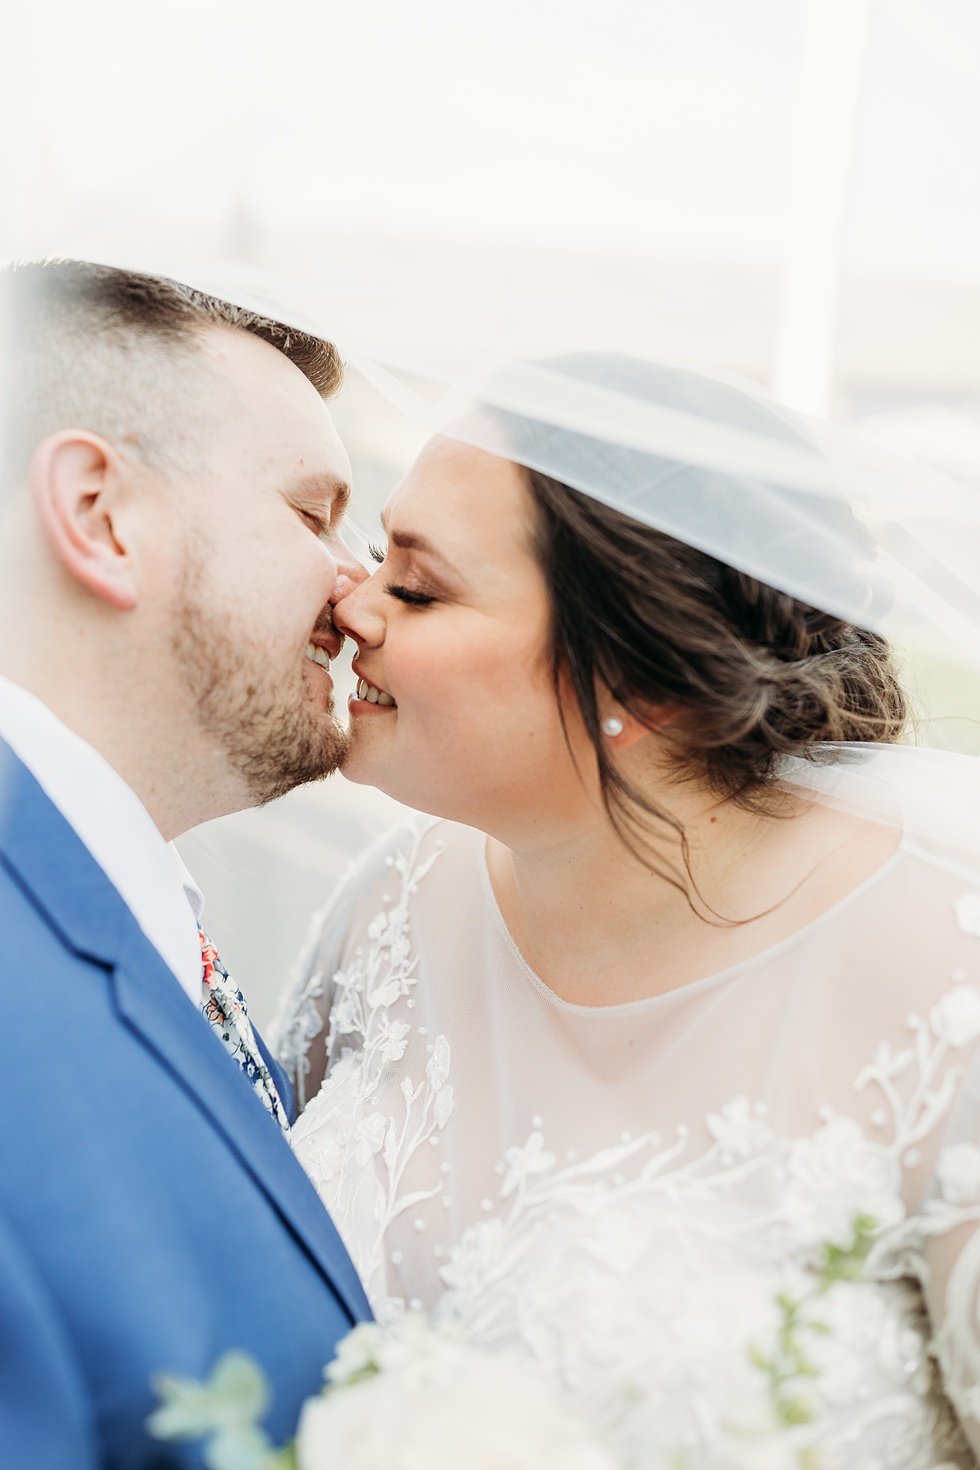  Bride and Groom portraits on wedding day. Spring wedding at The Refinery Jeffersonville, Indiana 